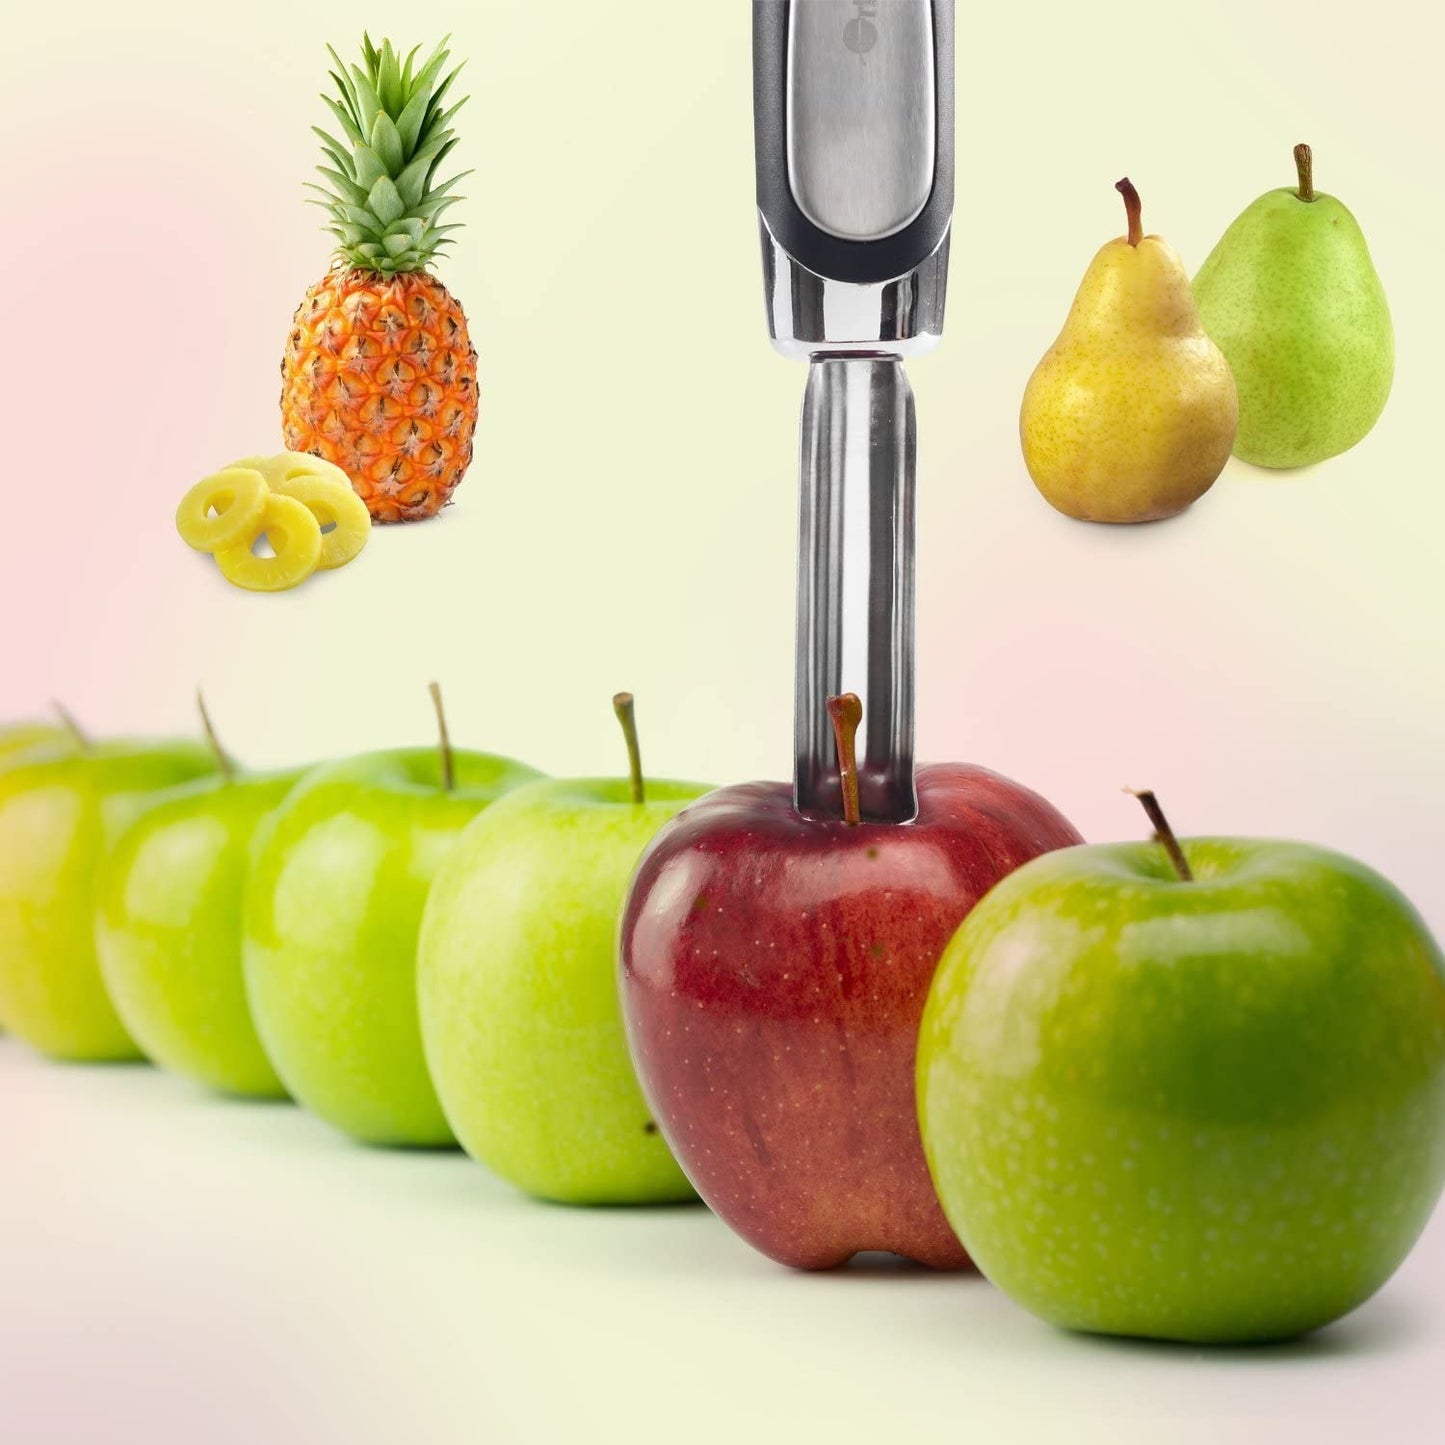 An apple corer has been placed in the centre of a red apple preparing to core out the centre. There are also green apples, two pears and a pineapple.